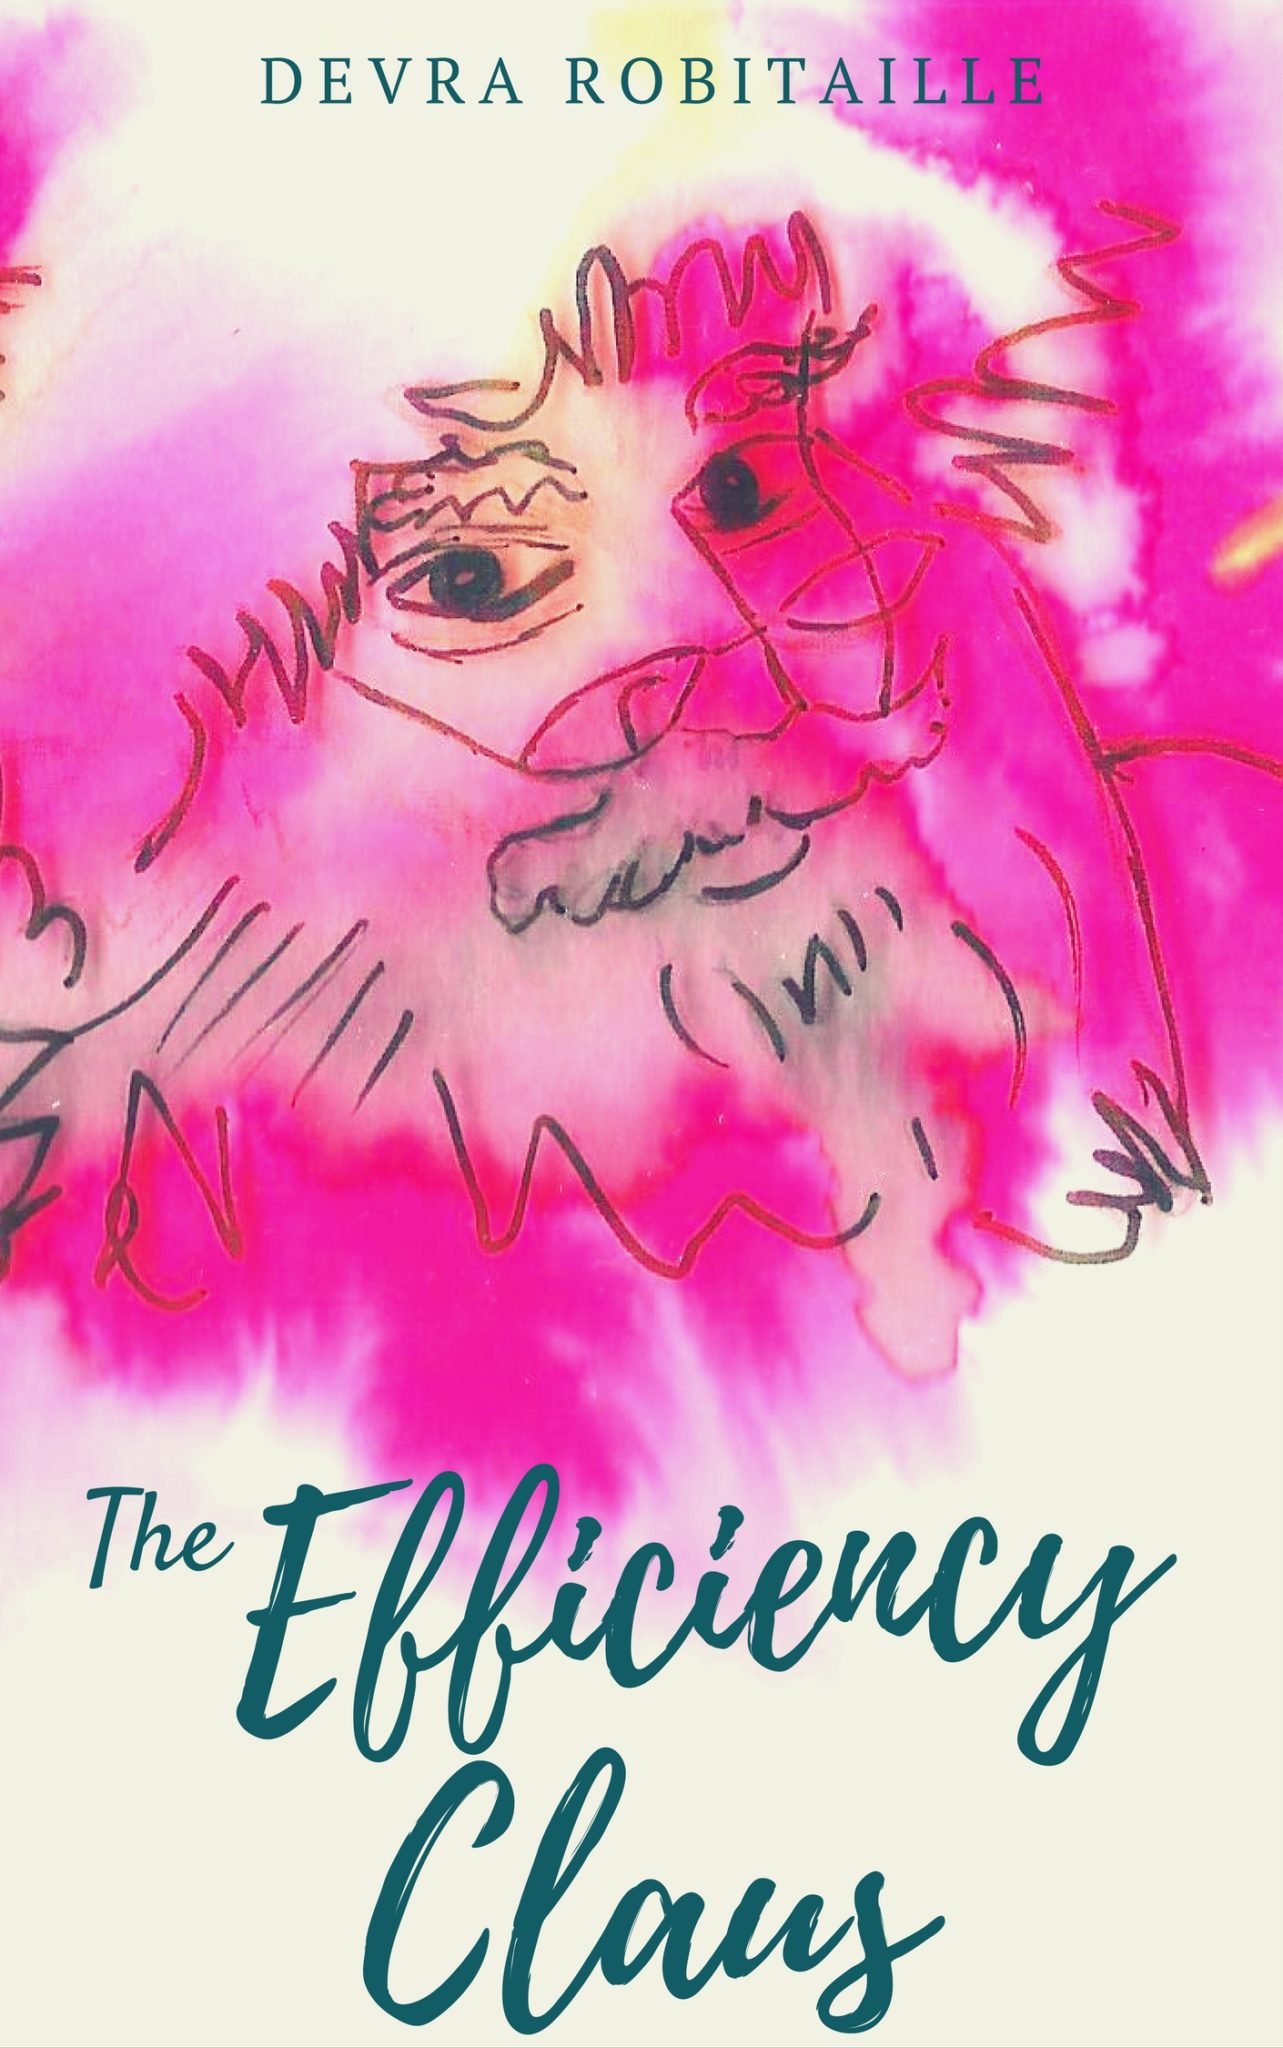 FREE: The Efficiency Claus: An Improbable Christmas Tale by Devra Robitaille